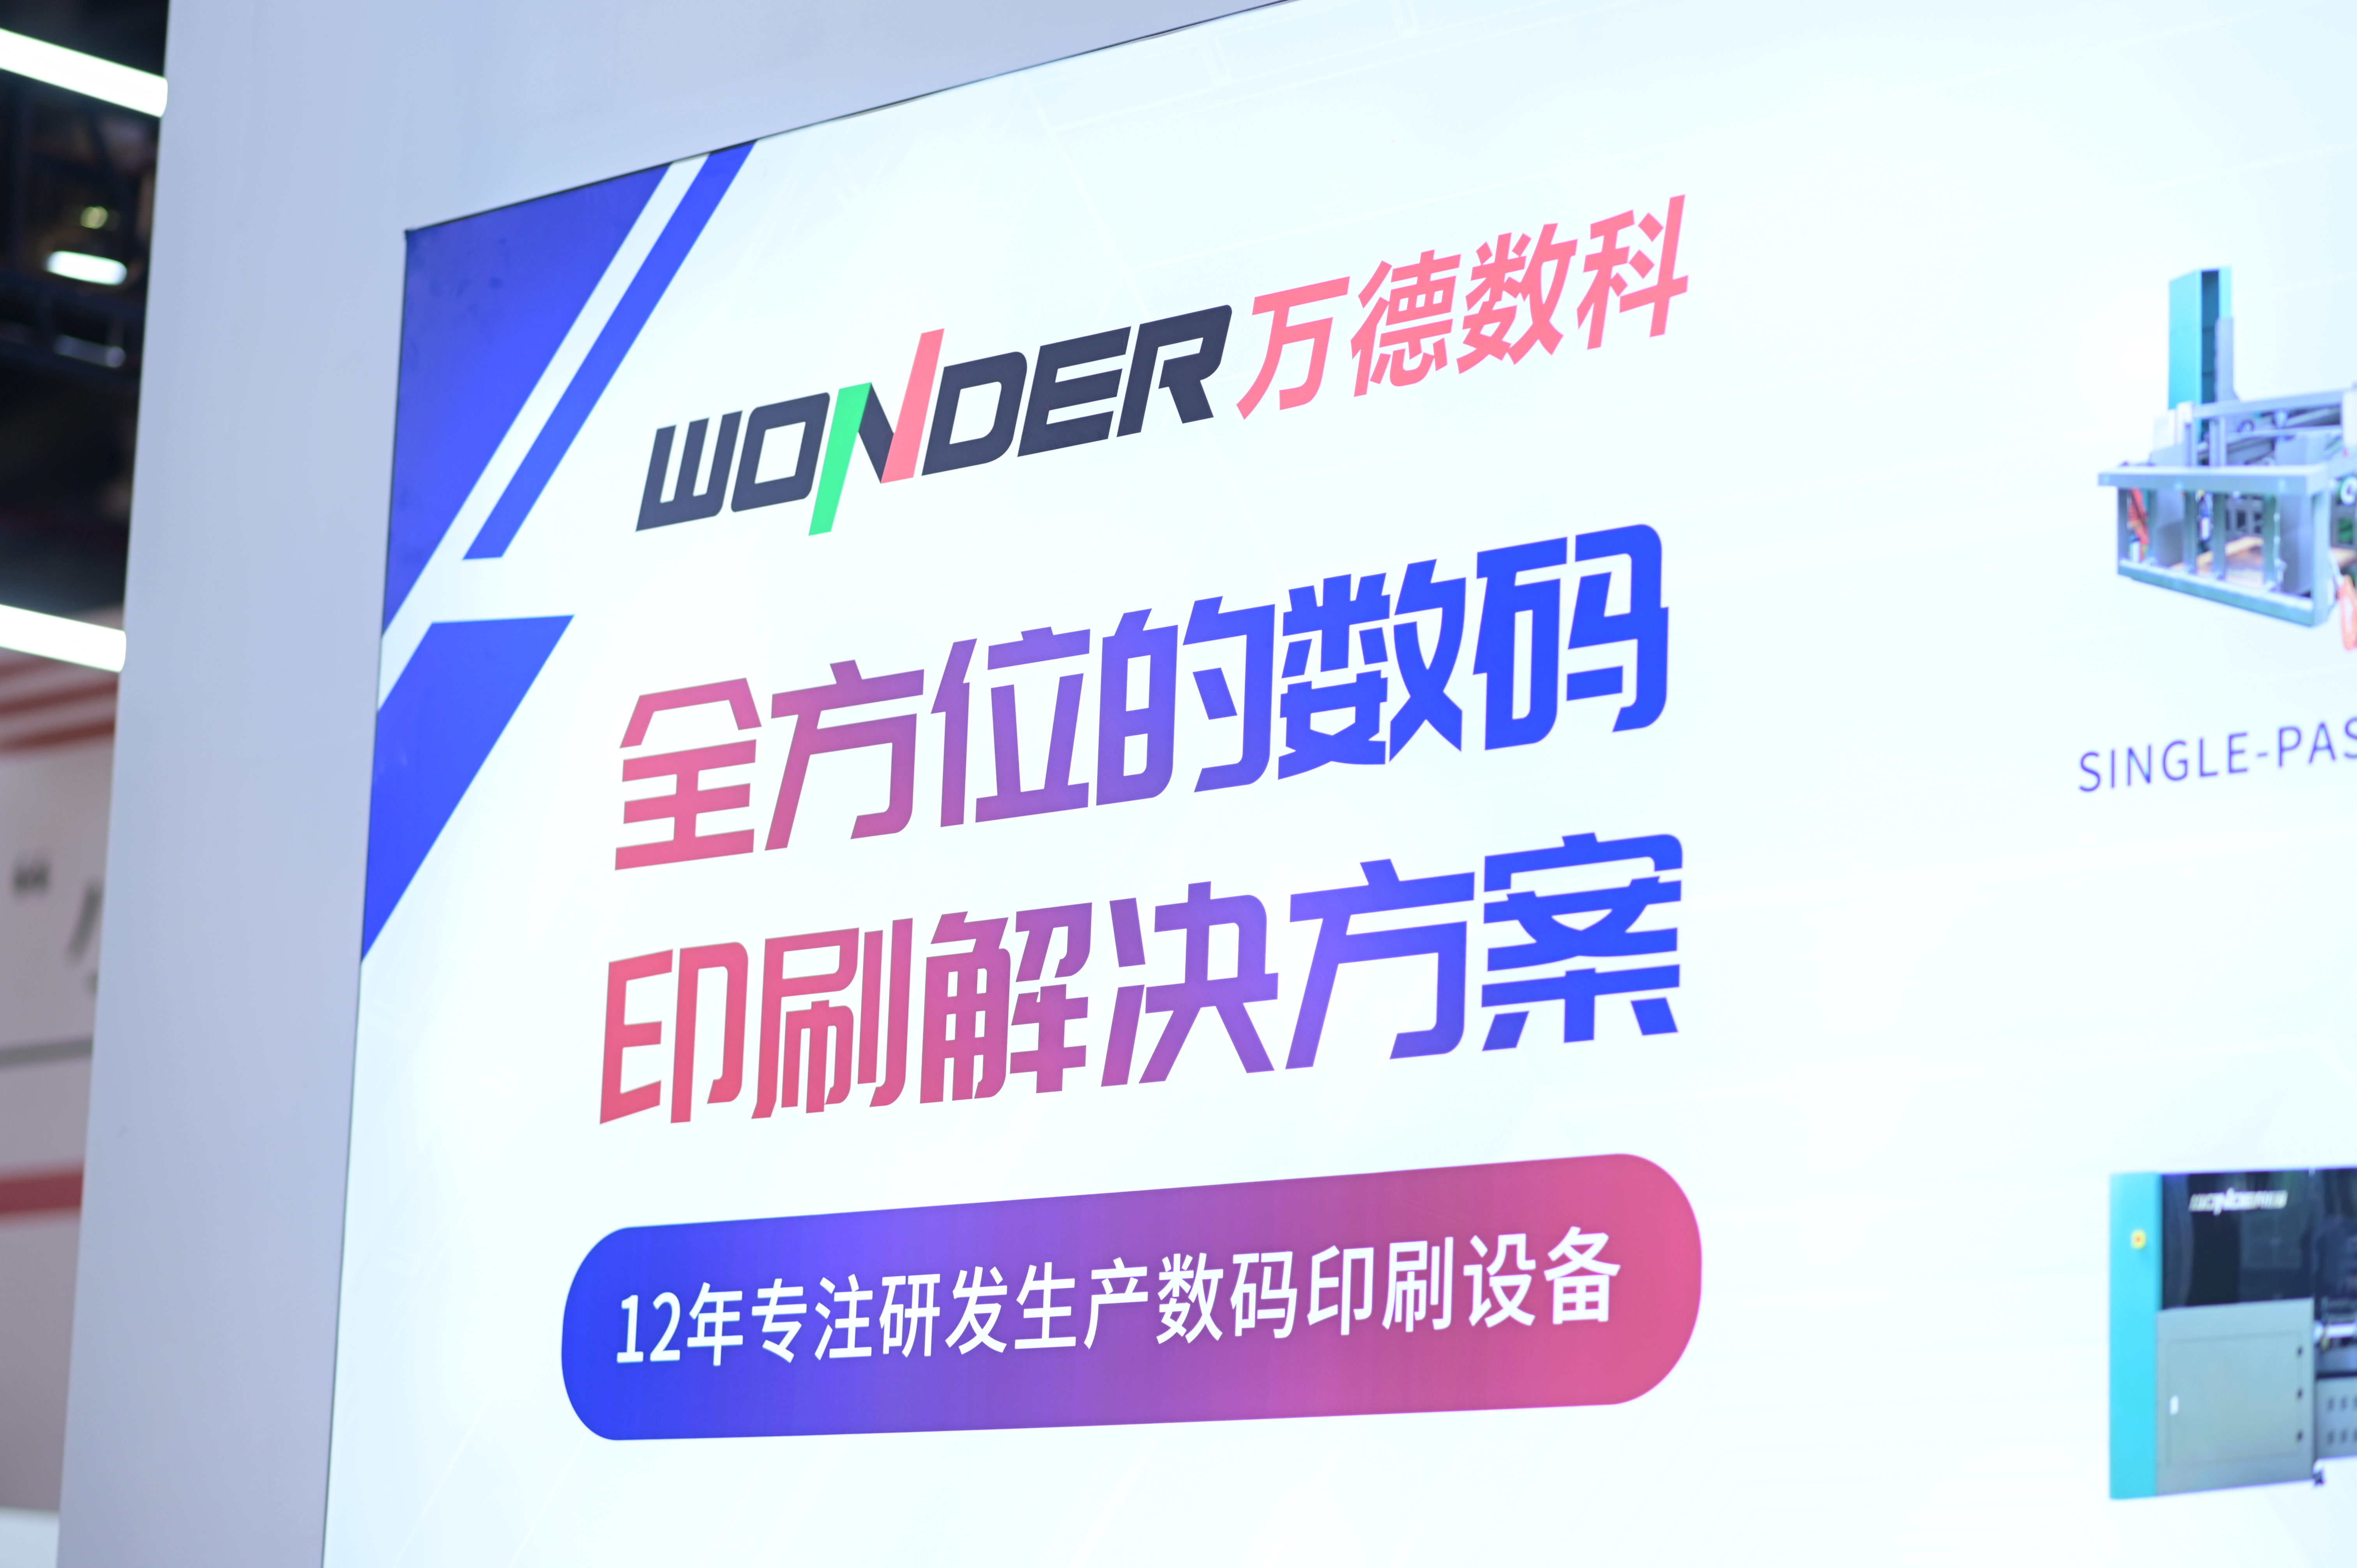 Wonder Digital had a glamorous debut on 2023 Chinese International Corrugated Festival, and signed quite a few digital printing machines!